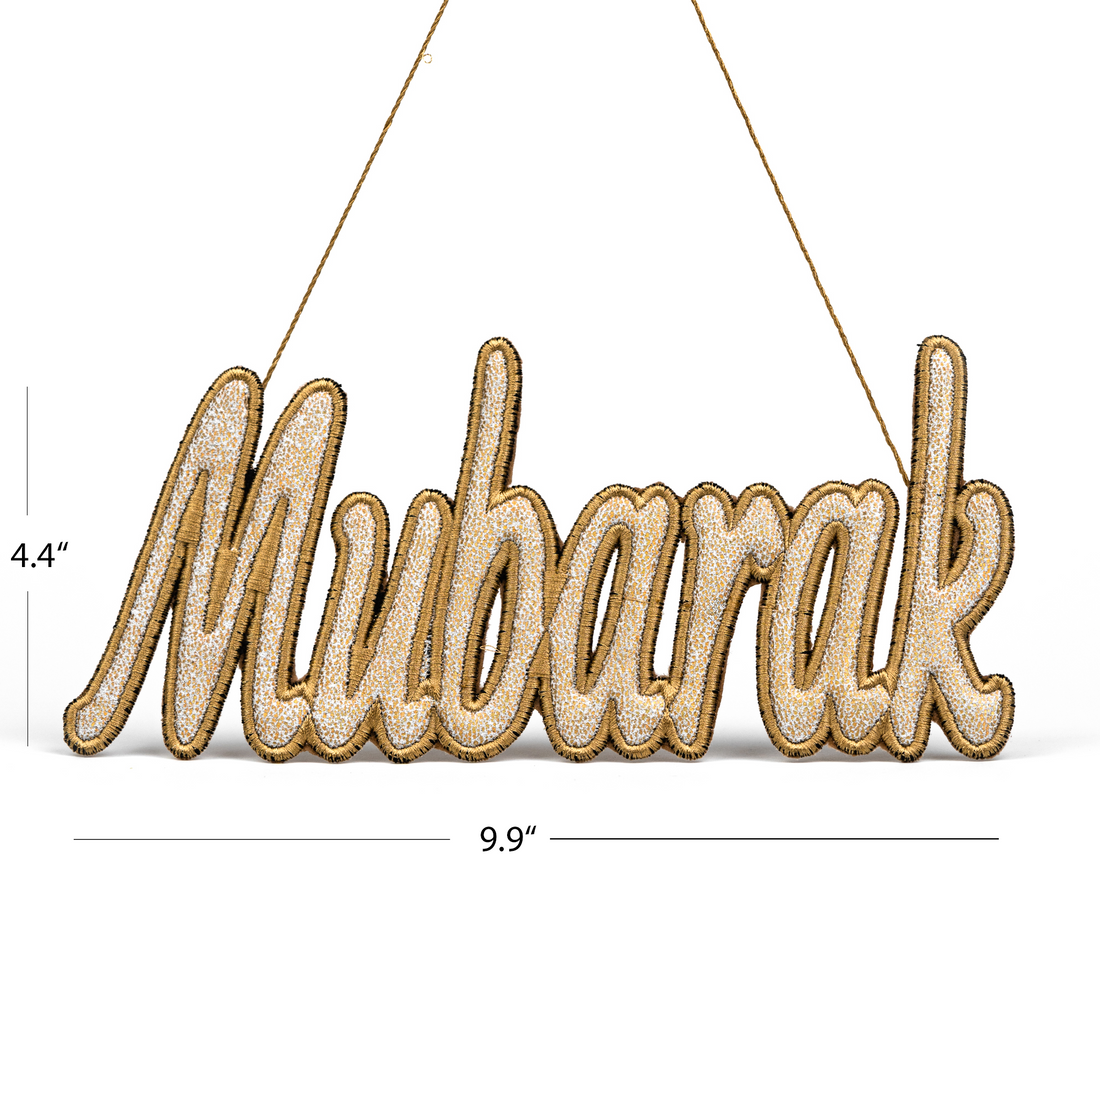 Mubarak Embroidery Ornament Golden Color with dimension